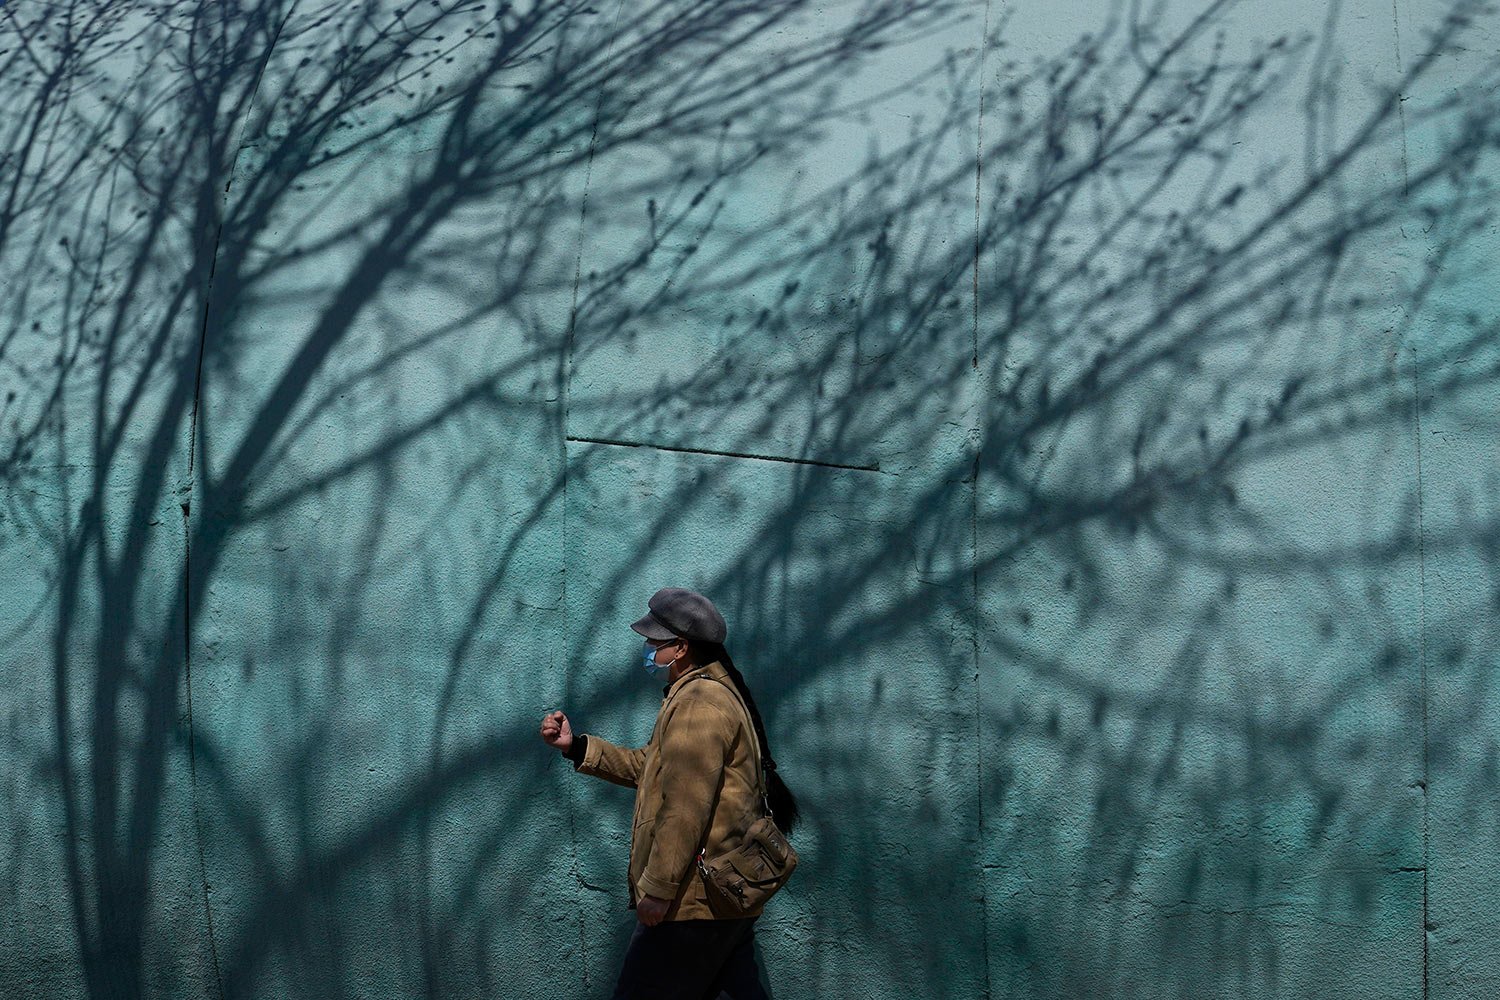  A resident wearing a mask walks past shadows of a tree in a park on Thursday, March 31, 2022, in Beijing.  (AP Photo/Ng Han Guan) 